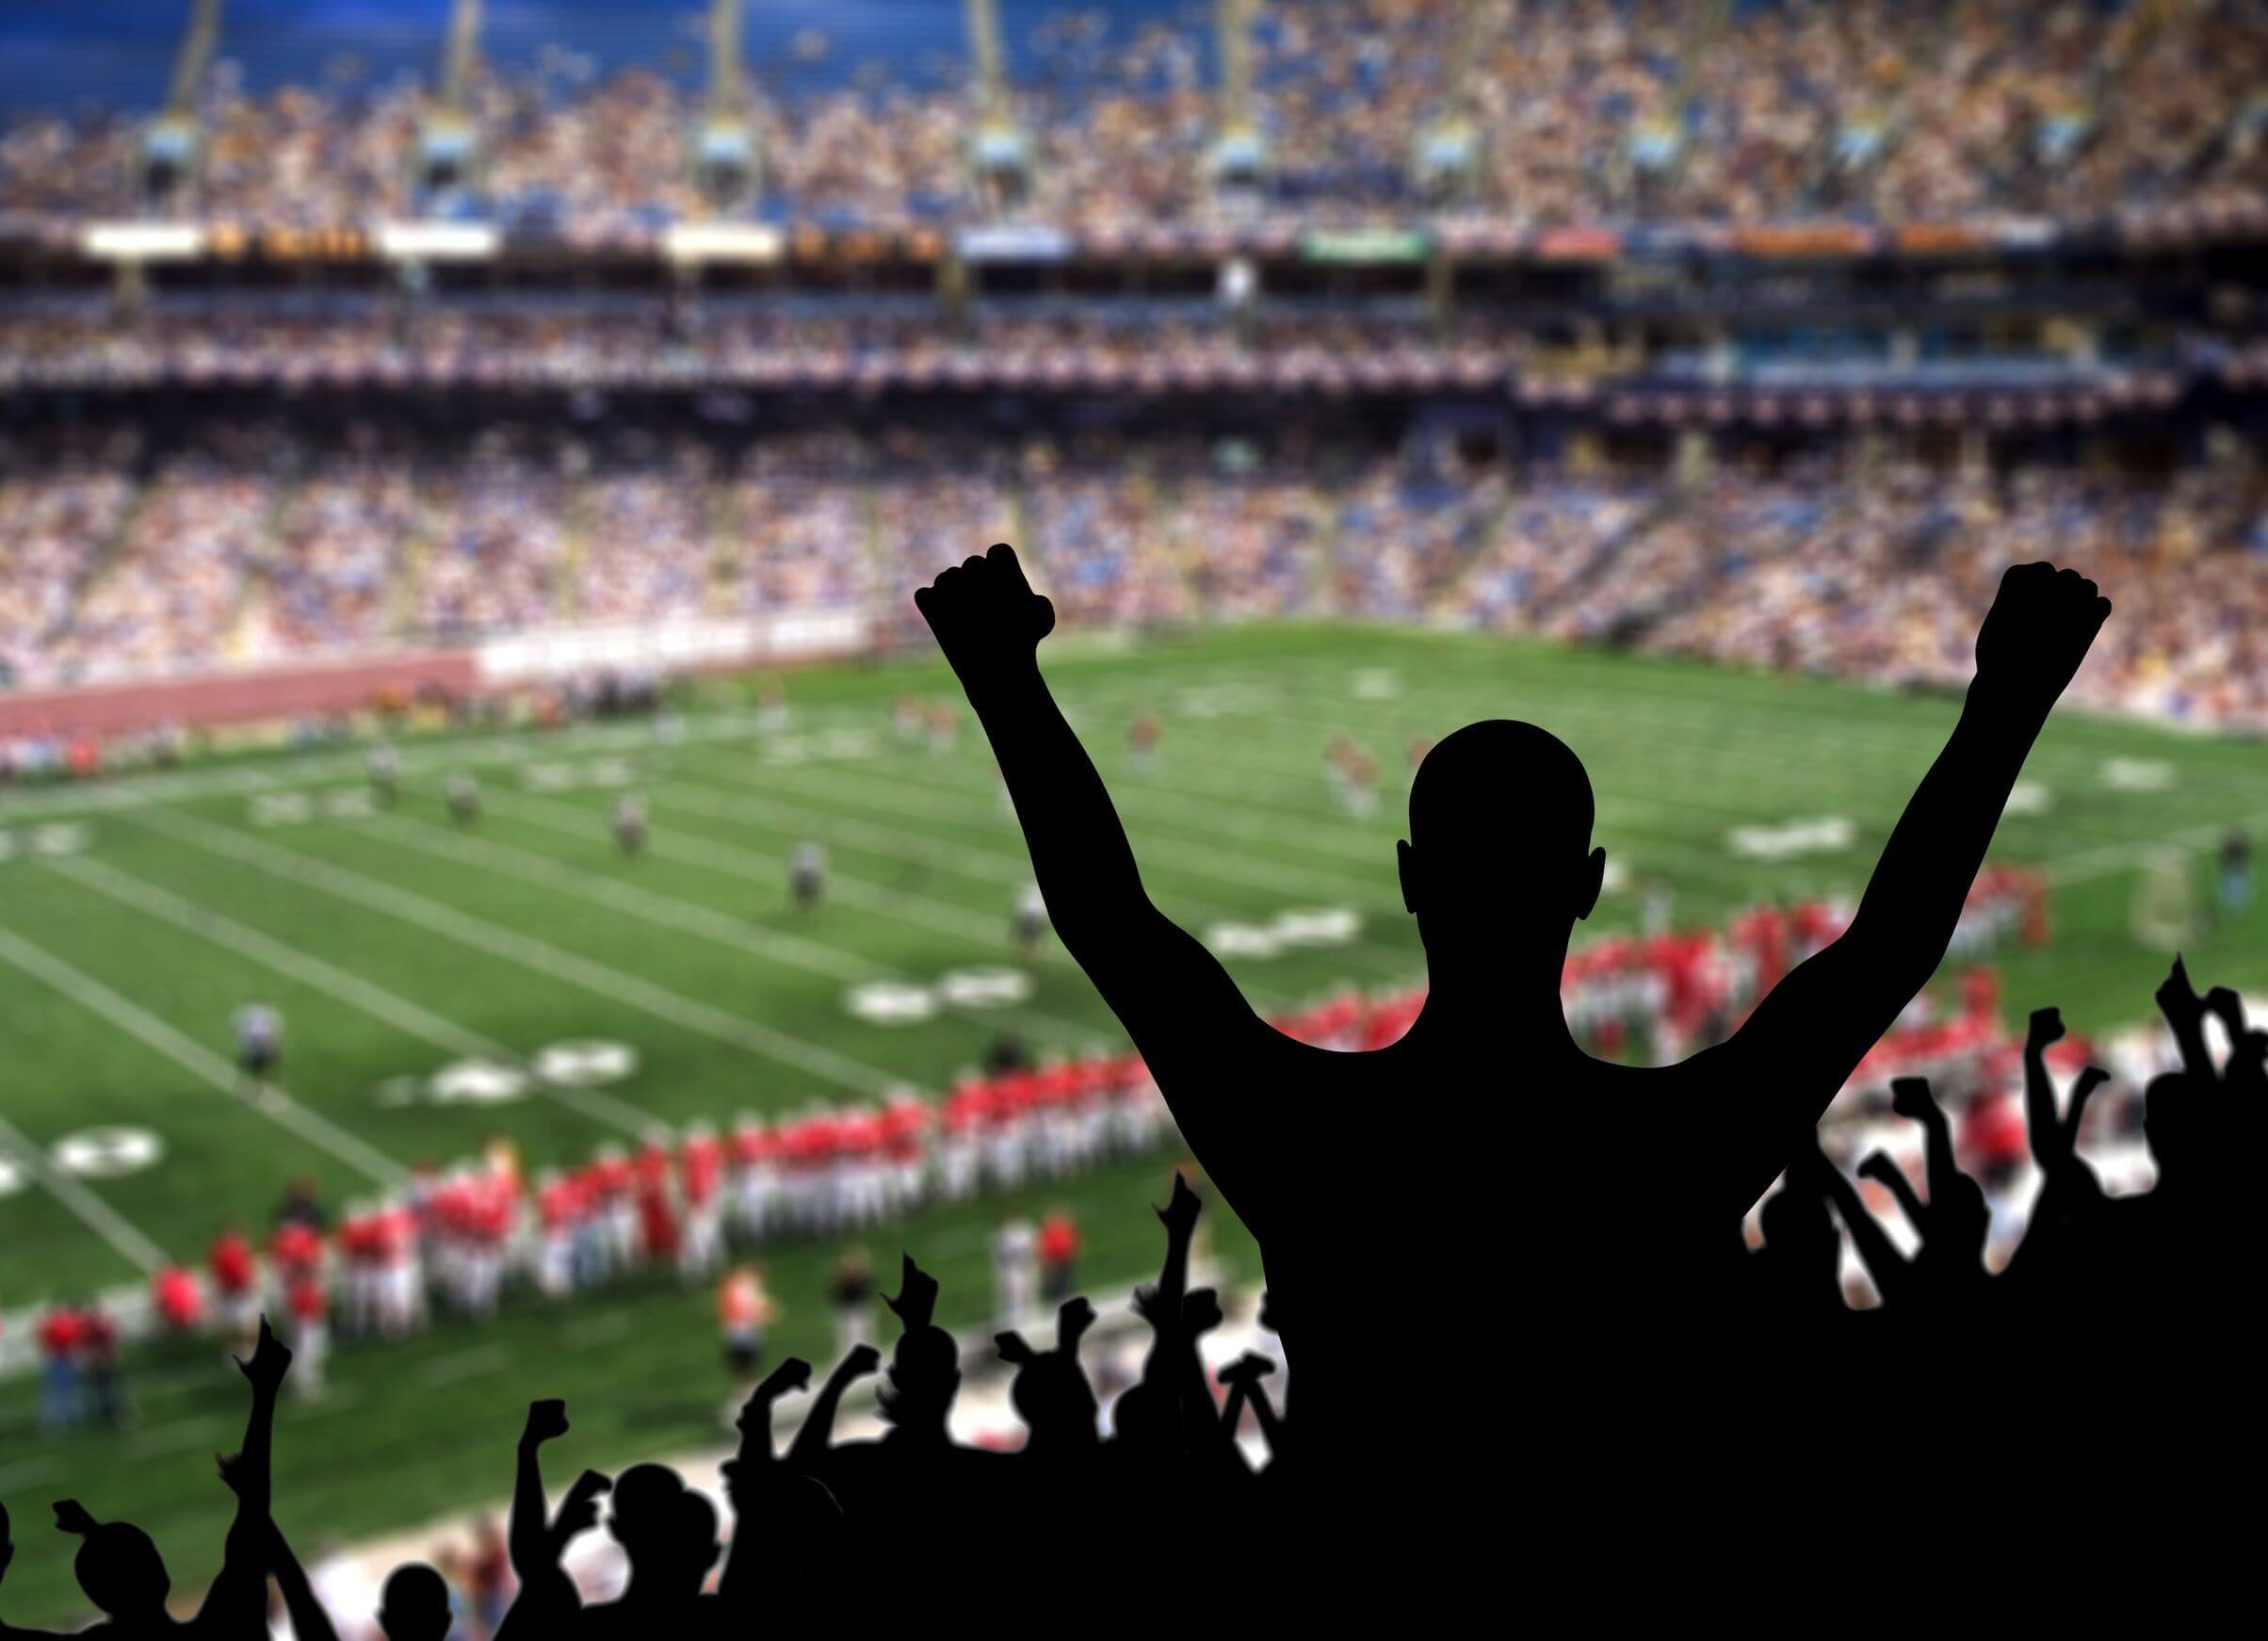 It's time for legal sports betting